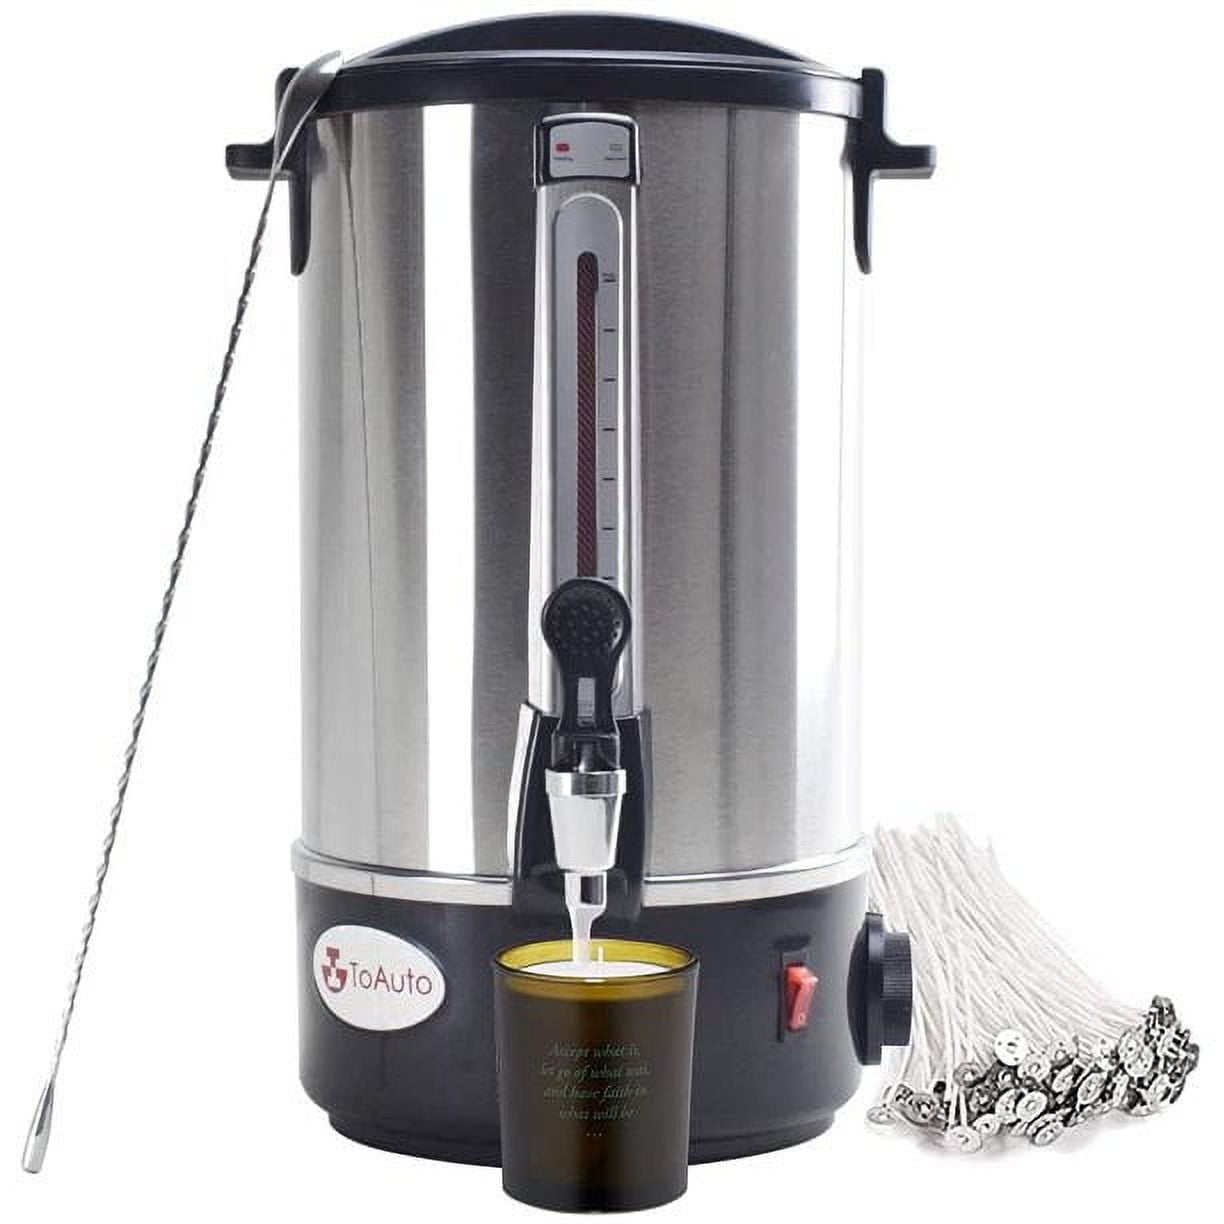 Wax Melter for Candle Making 12 Lbs Extra Large Wax Melting Furnace with  Quick Pour Spout and Temp Control 